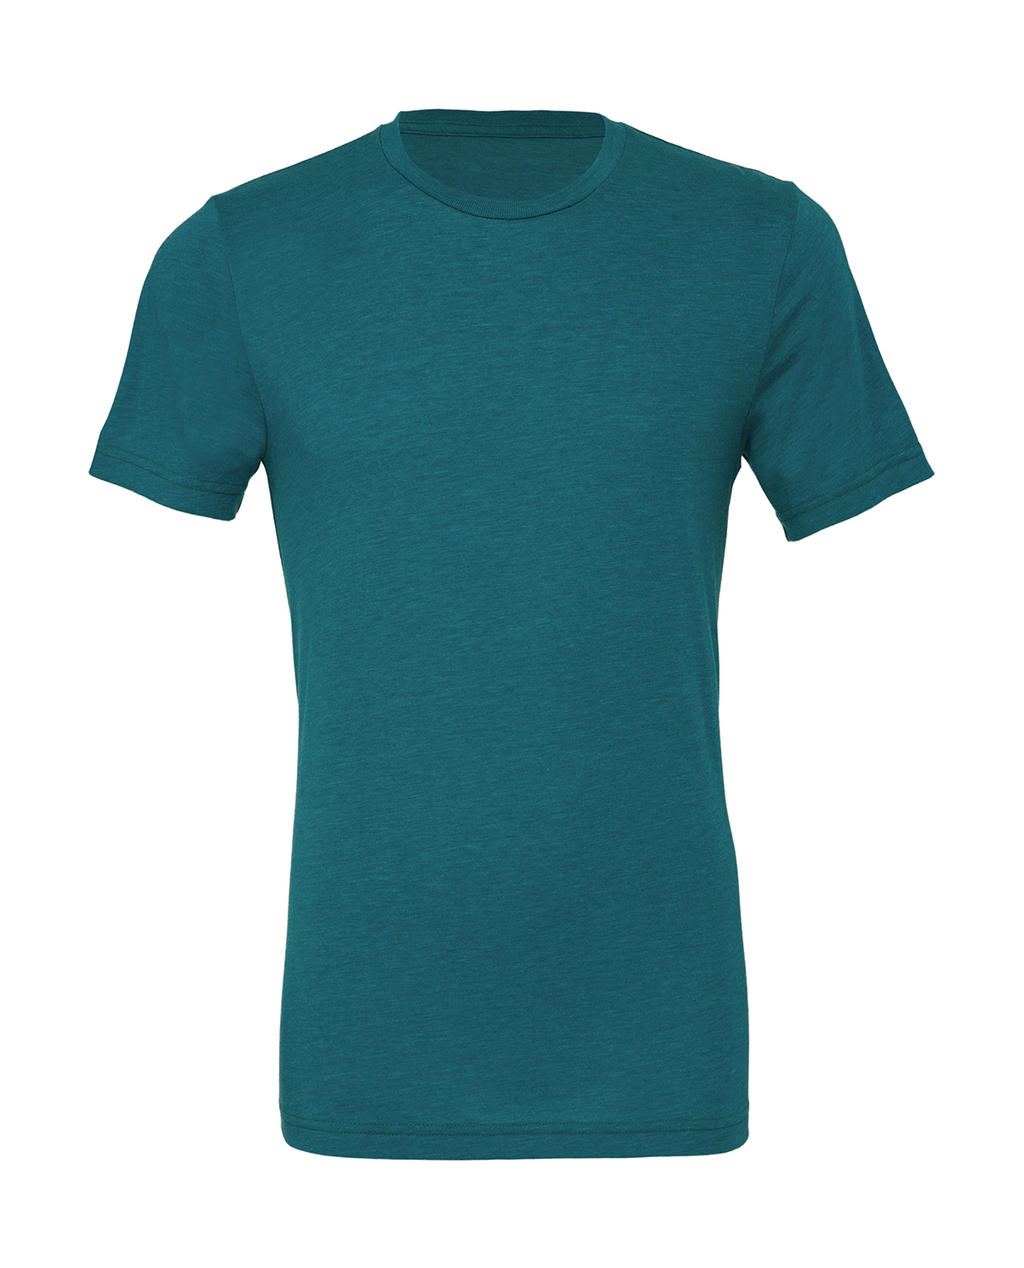  Unisex Triblend Short Sleeve Tee in Farbe Teal Triblend